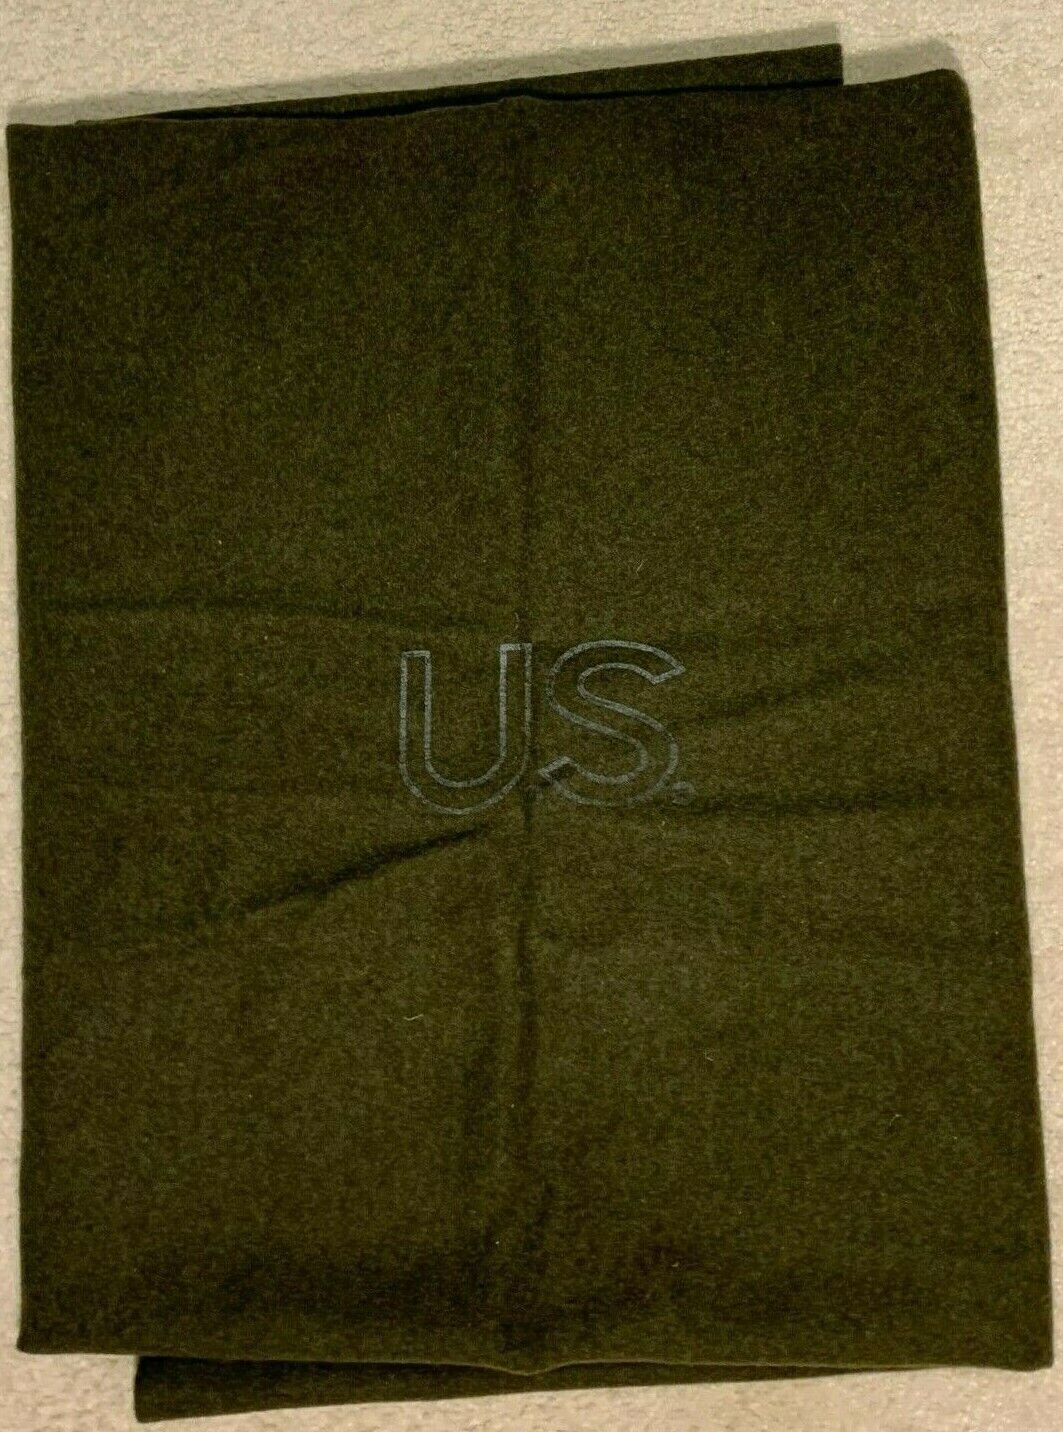 Authentic US Army Wool Blanket USGI 66in x 84in 100% Wool BRAND NEW